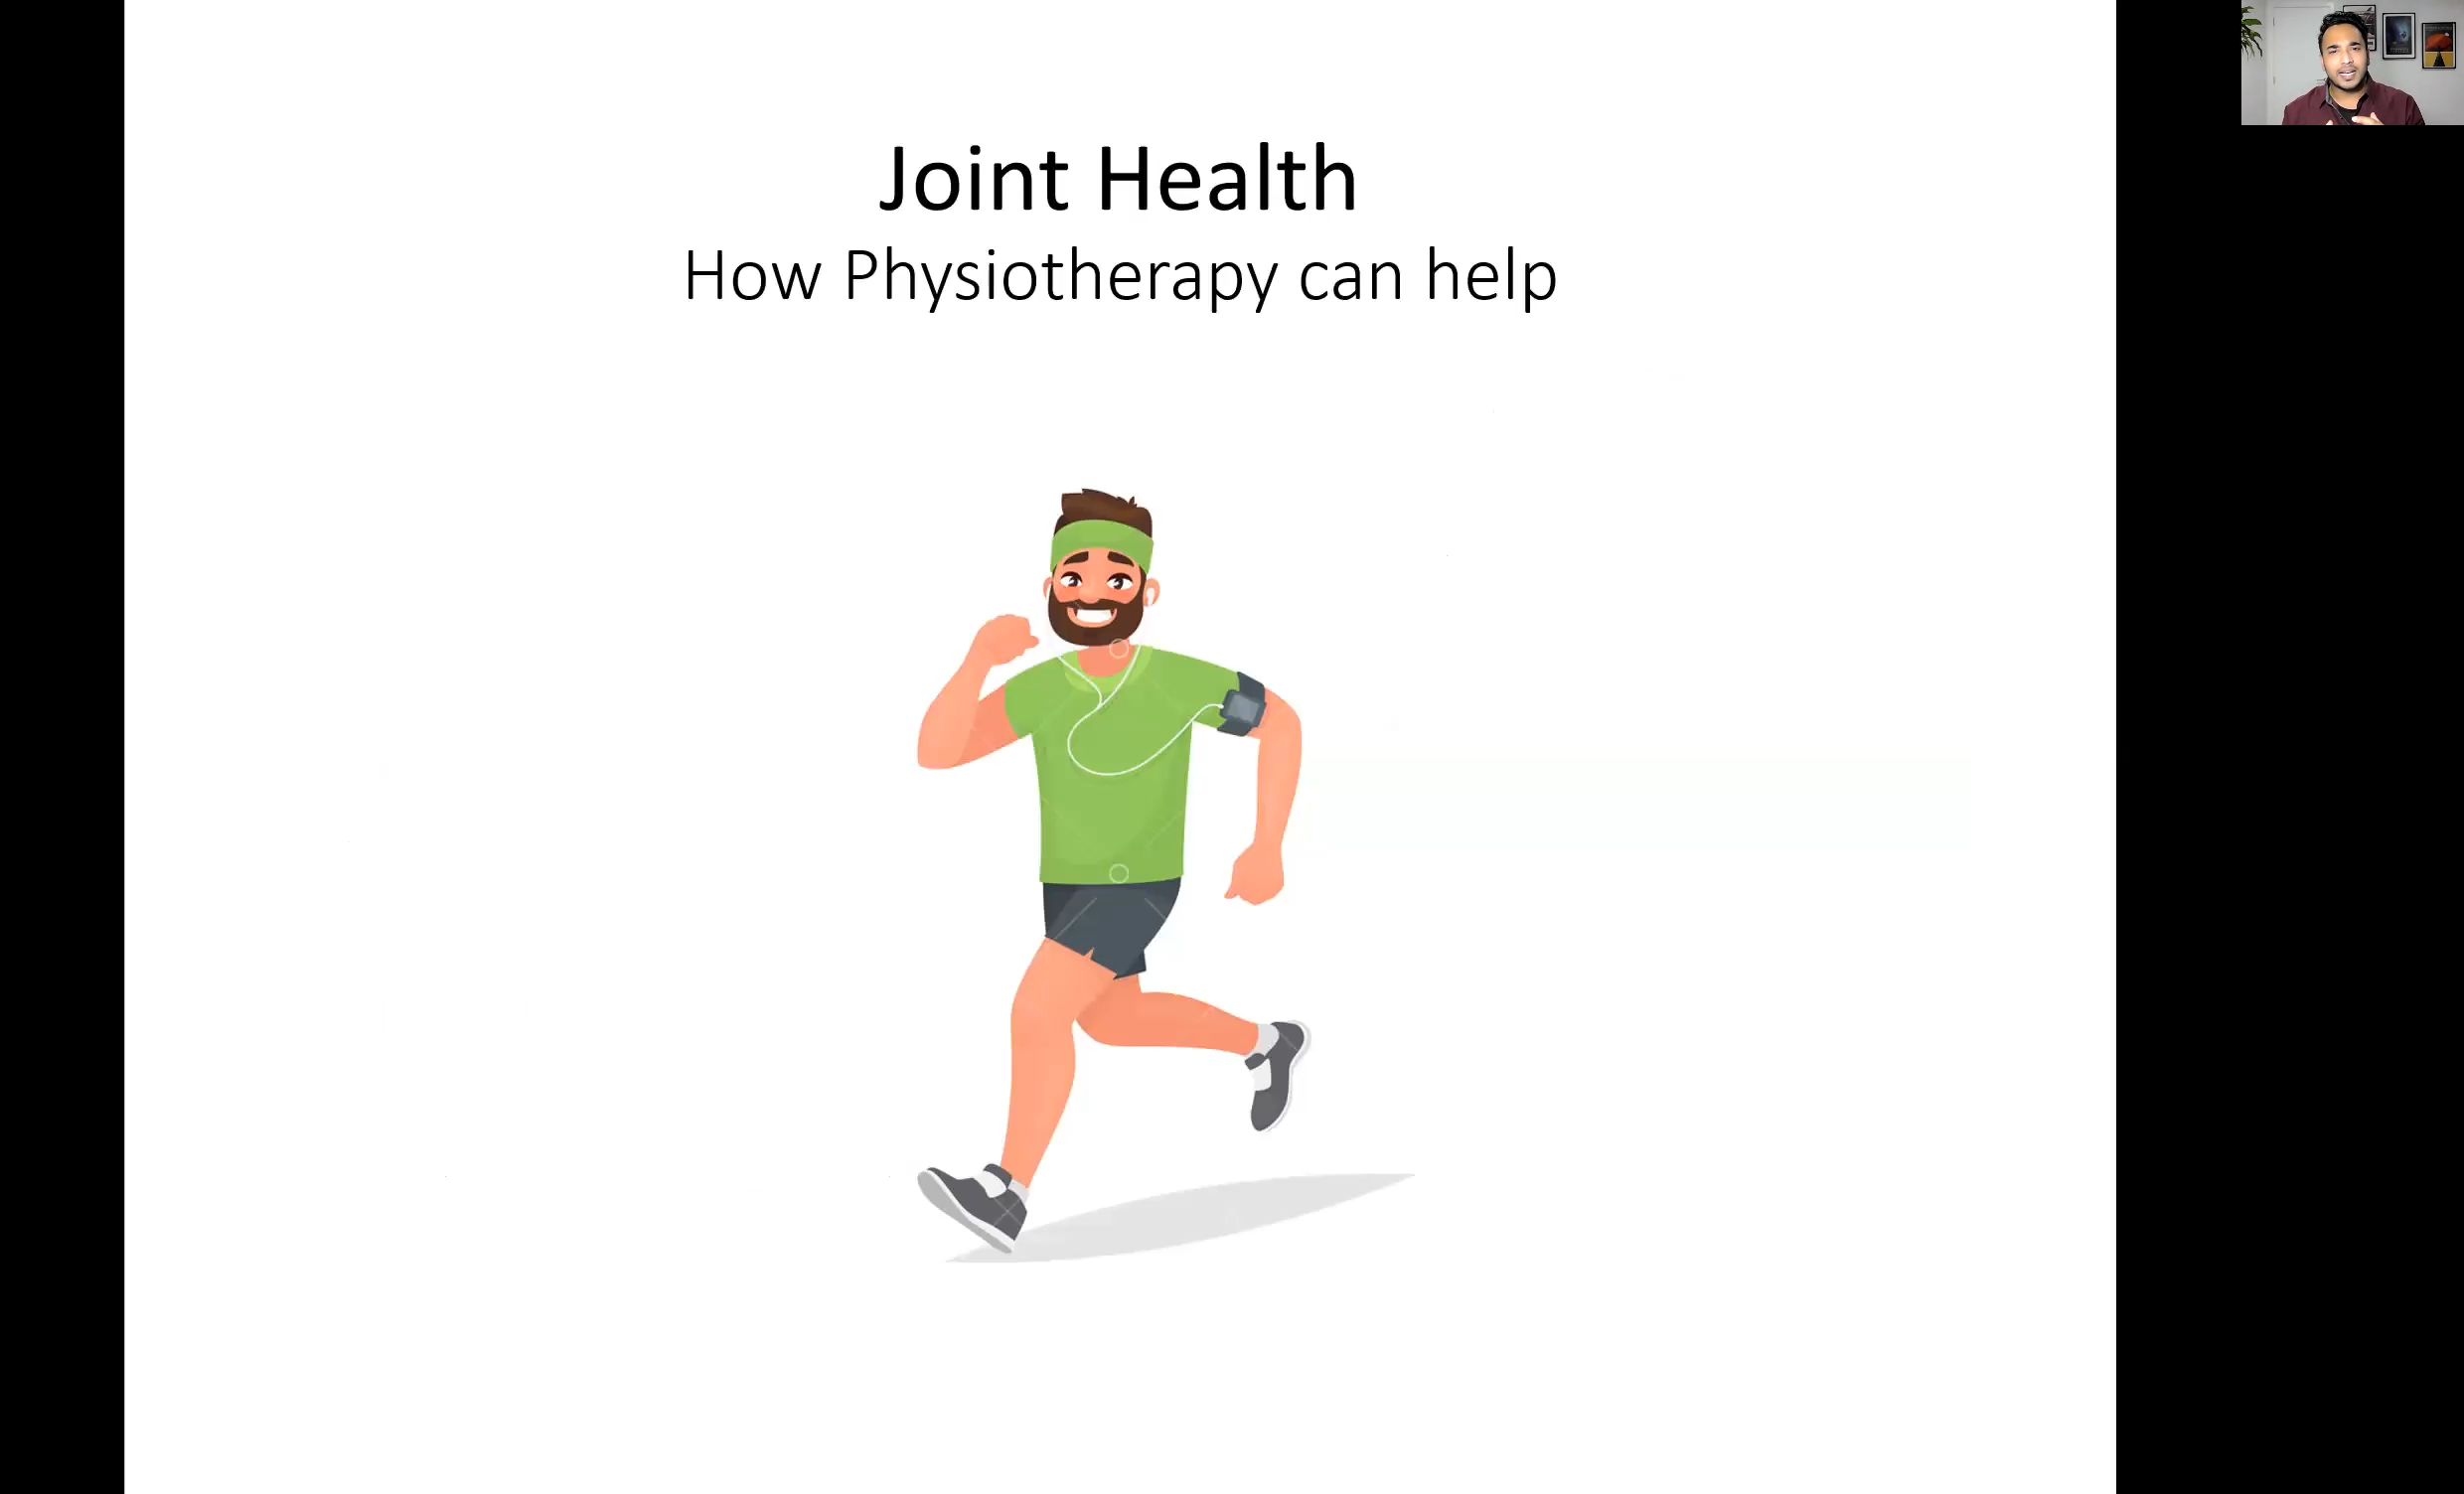 Abhi Tikkisetty: Benefits of physiotherapy for joint health in haemophilia